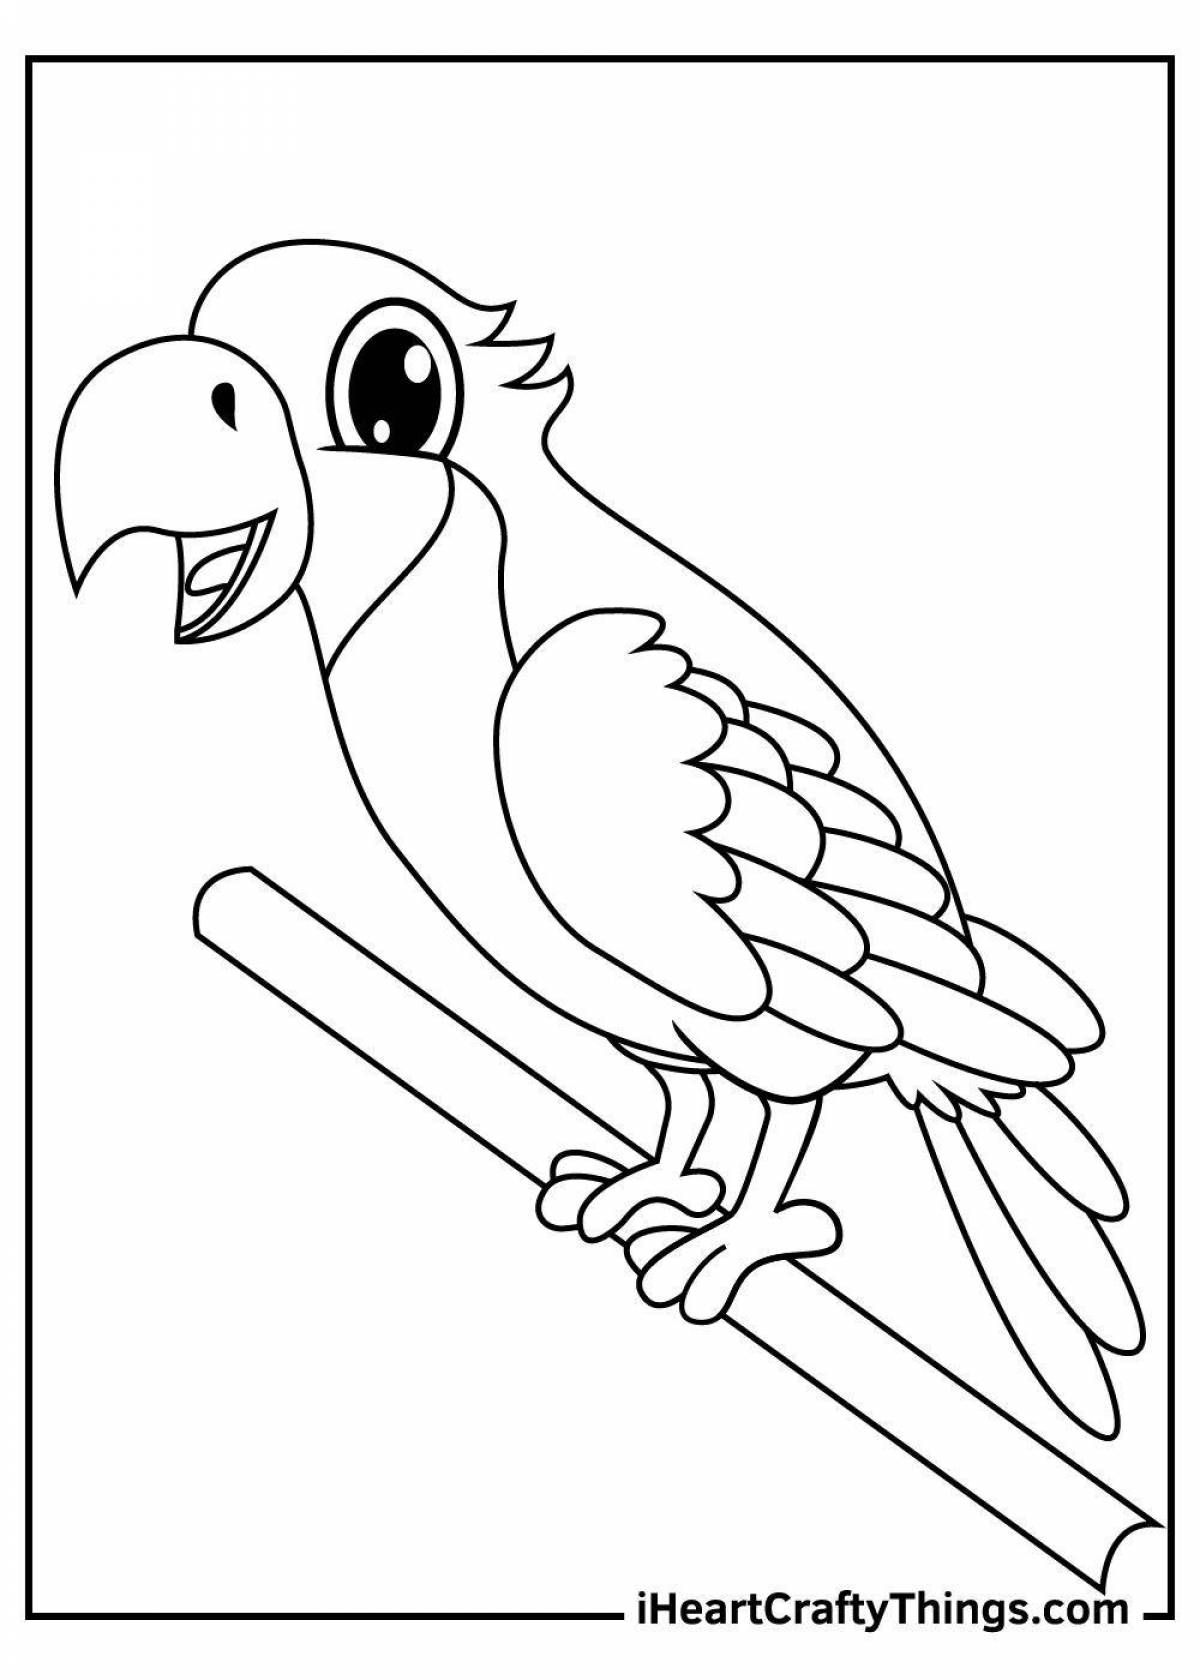 Fairy parrot coloring book for children 3-4 years old